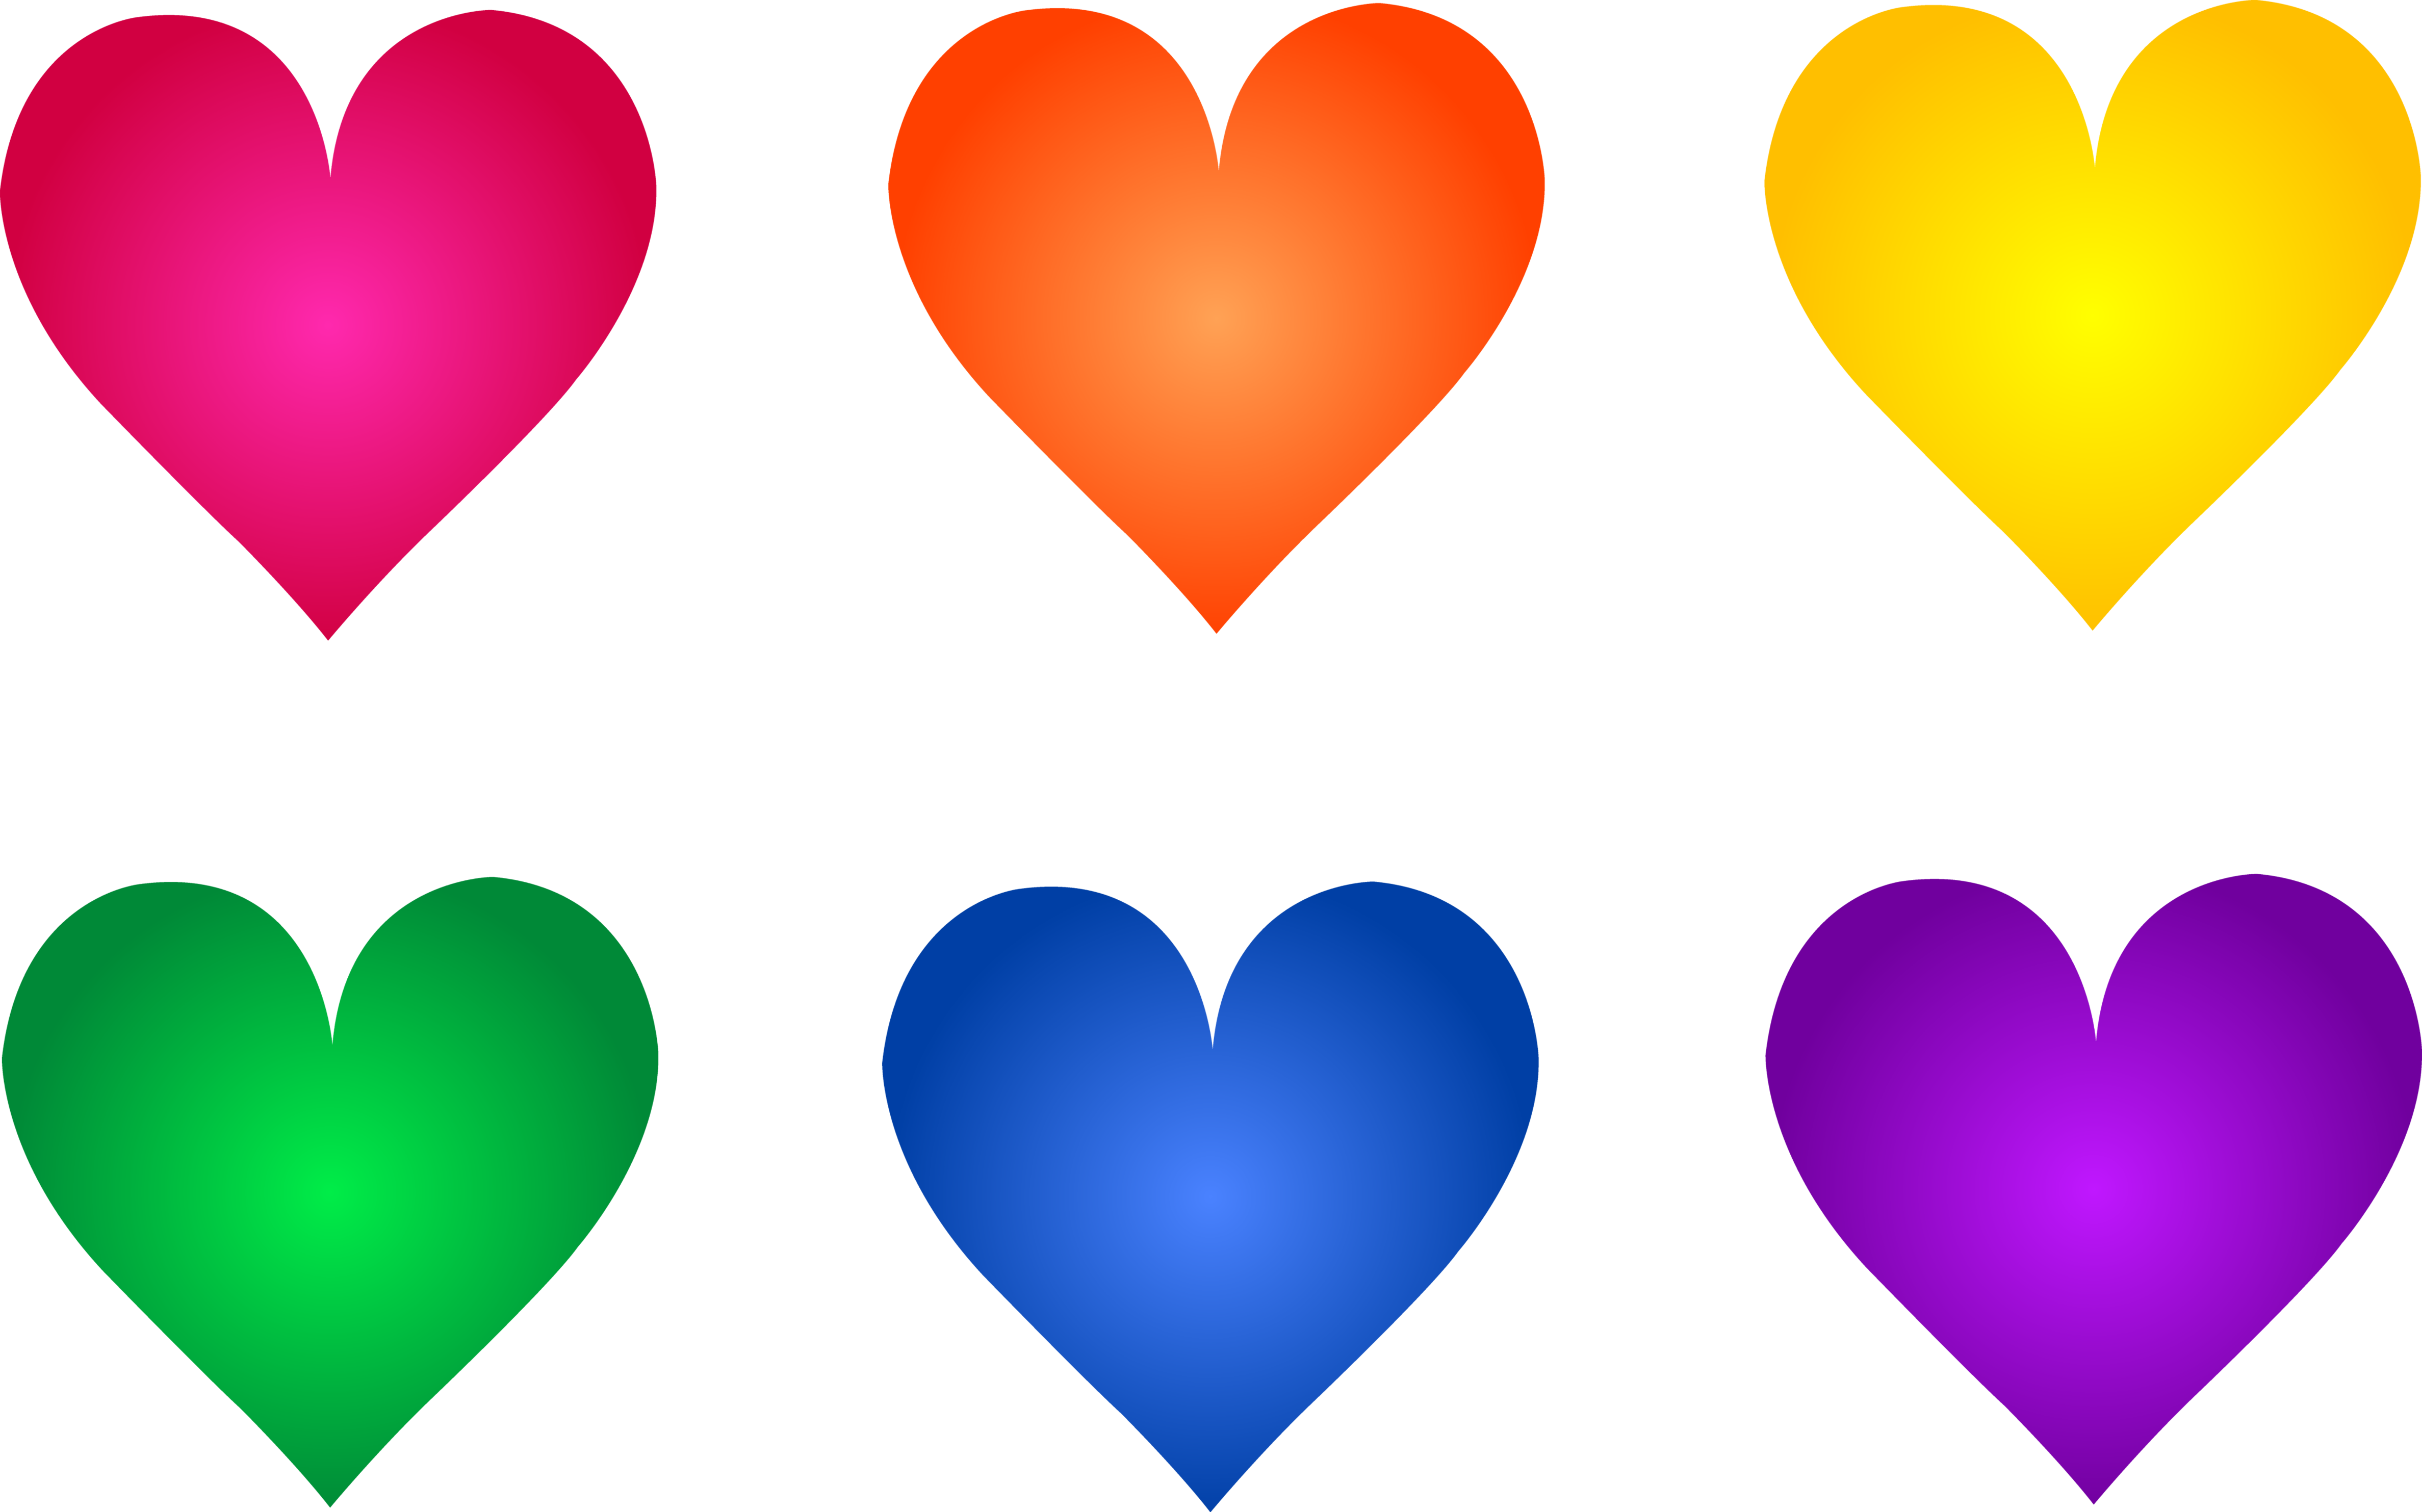 Colorful Rainbow Heart Symbols Free Clip Art Clipart - Free to use ...